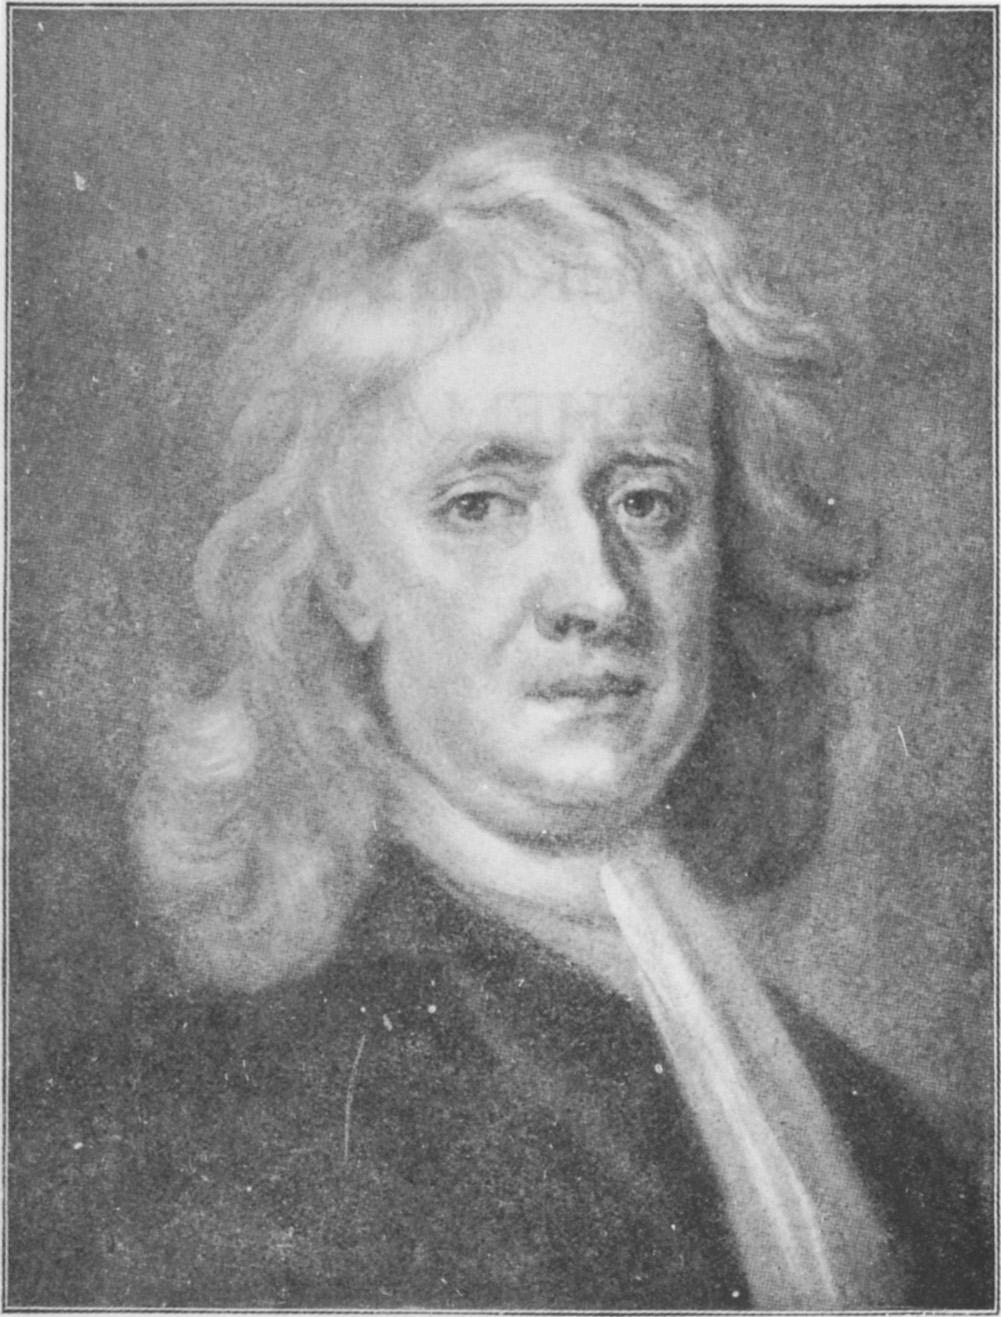 126 2 Solving Equations Numerically:Finding Our Roots Since there are many fine books about Newton (1642 1727) and his extraordinary contributions to science, let us just note that he lived in